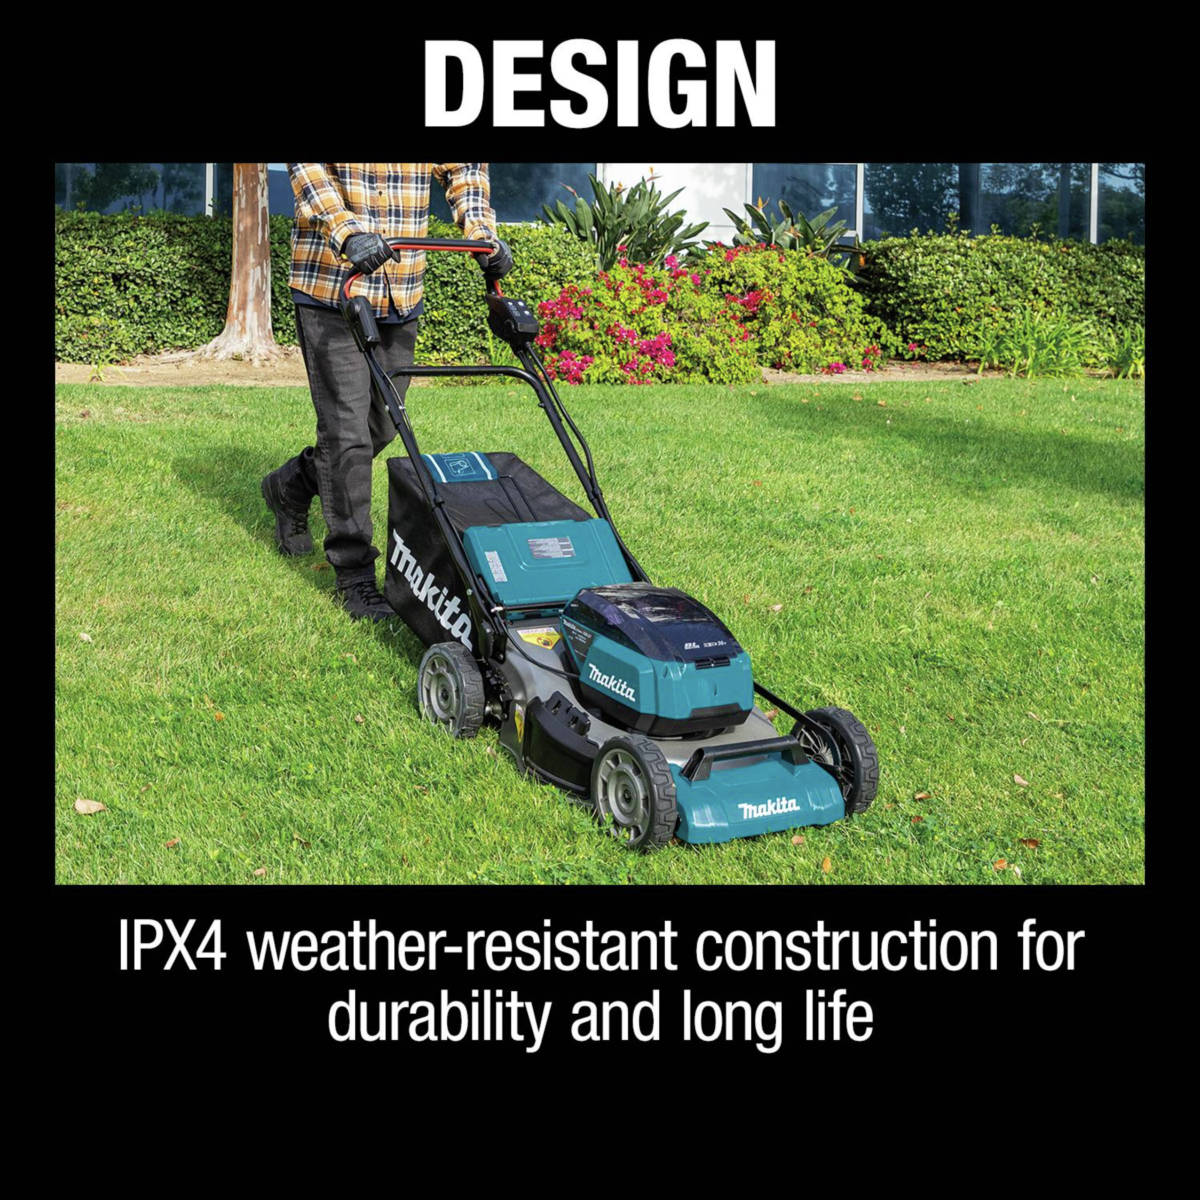 18V X2 (36V) LXT Lawn Mower is IPX4 weather-resistant